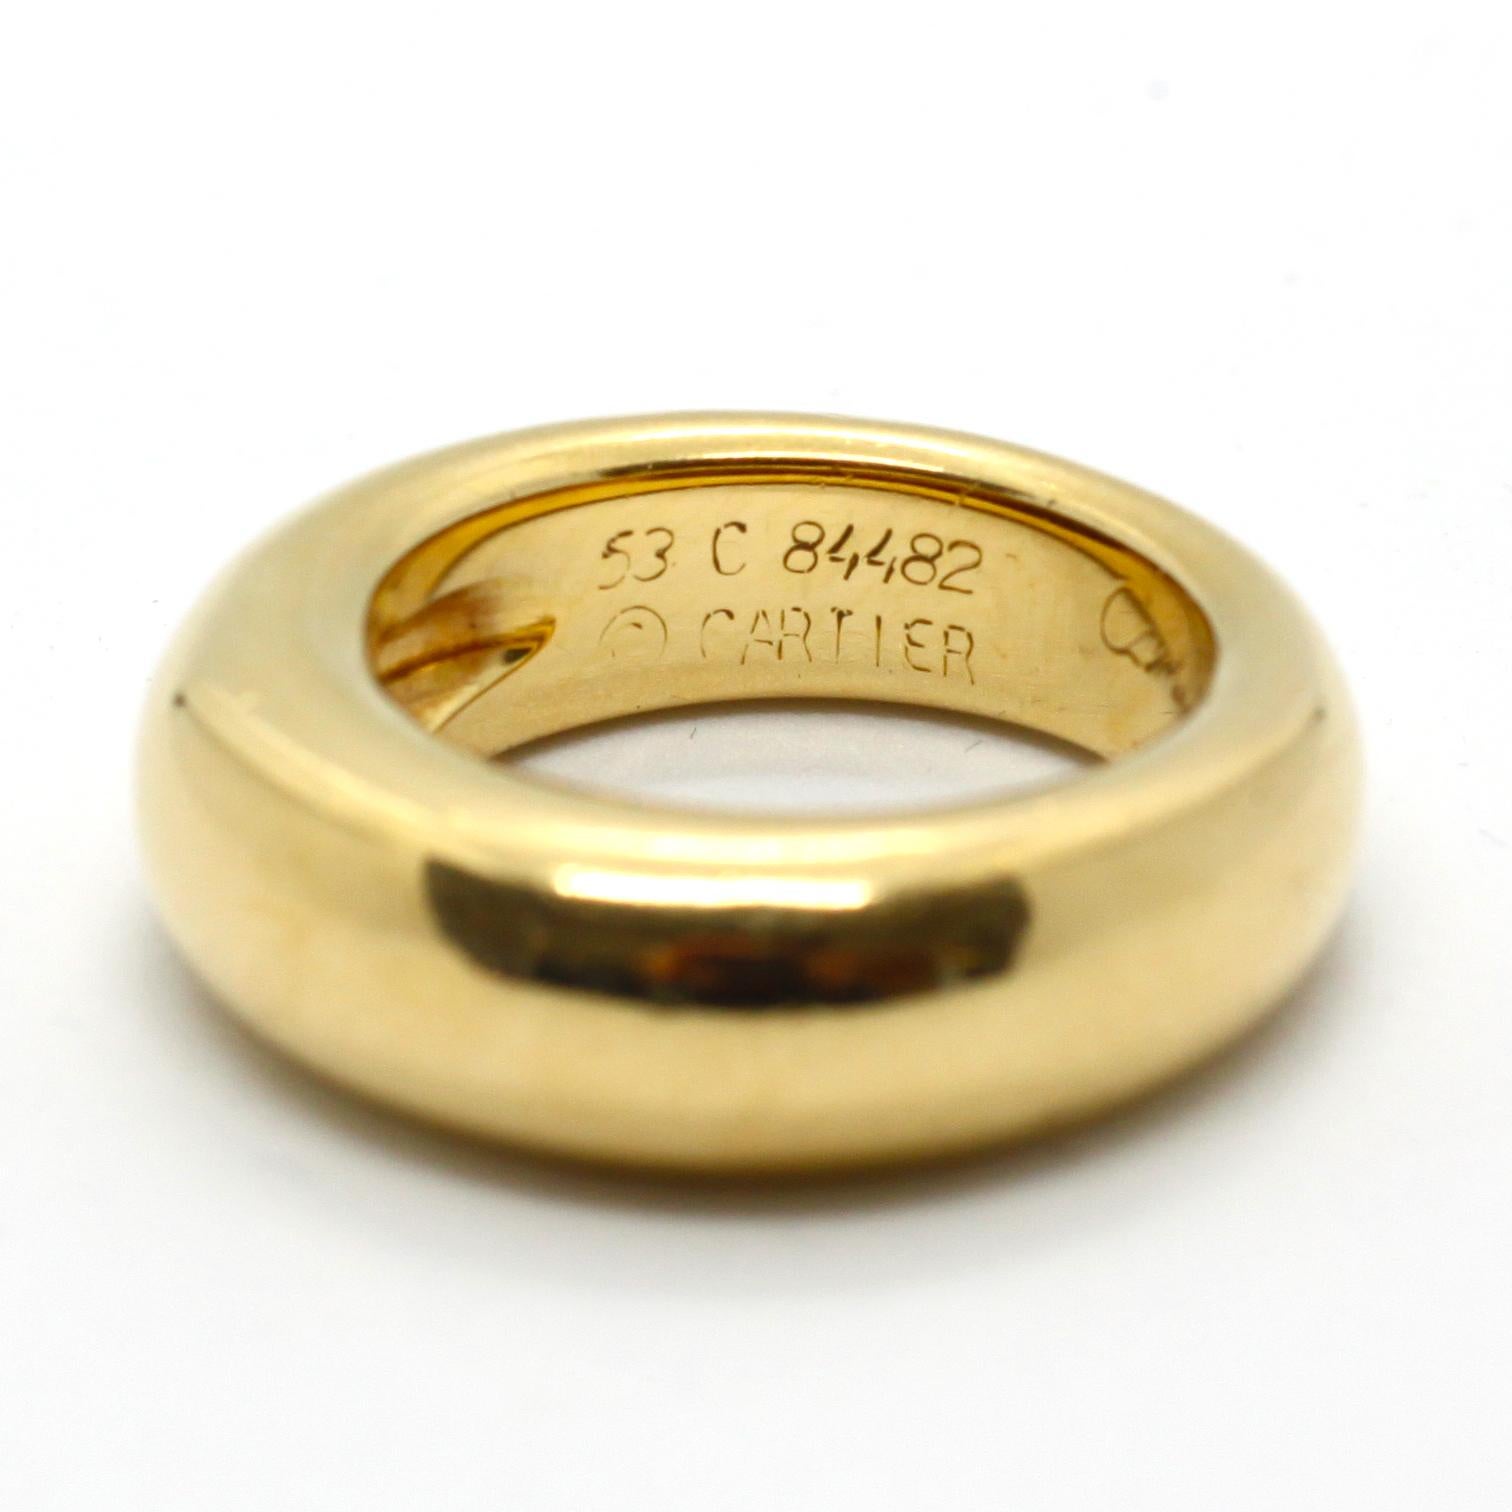 A yellow gold band ring by Cartier. The ring is in massive 18k yellow gold but still looks very sleek, which is very comfortable on the finger. The ring size is 53. The ring is signed and numbered by Cartier and has makers marks.